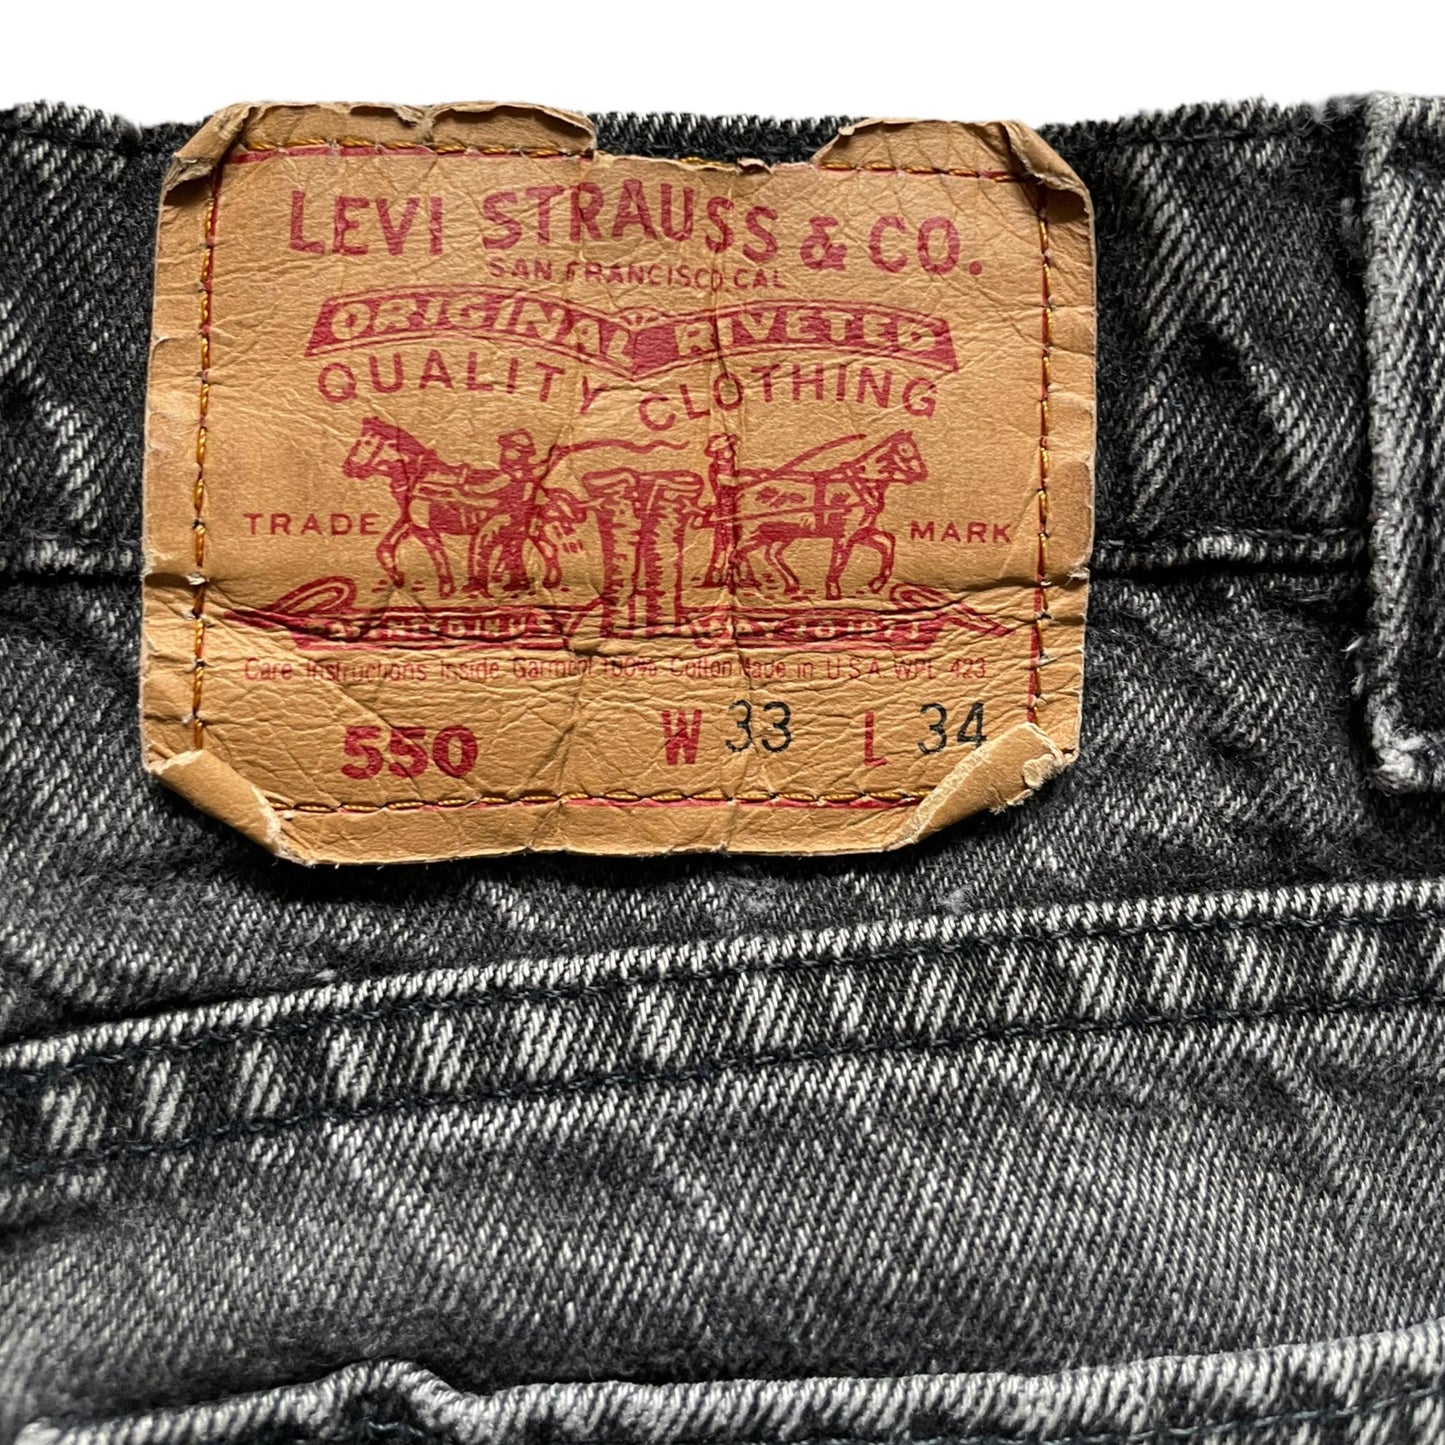 Back tag view of Vintage USA Mended Black Levi's 550s 33x34 